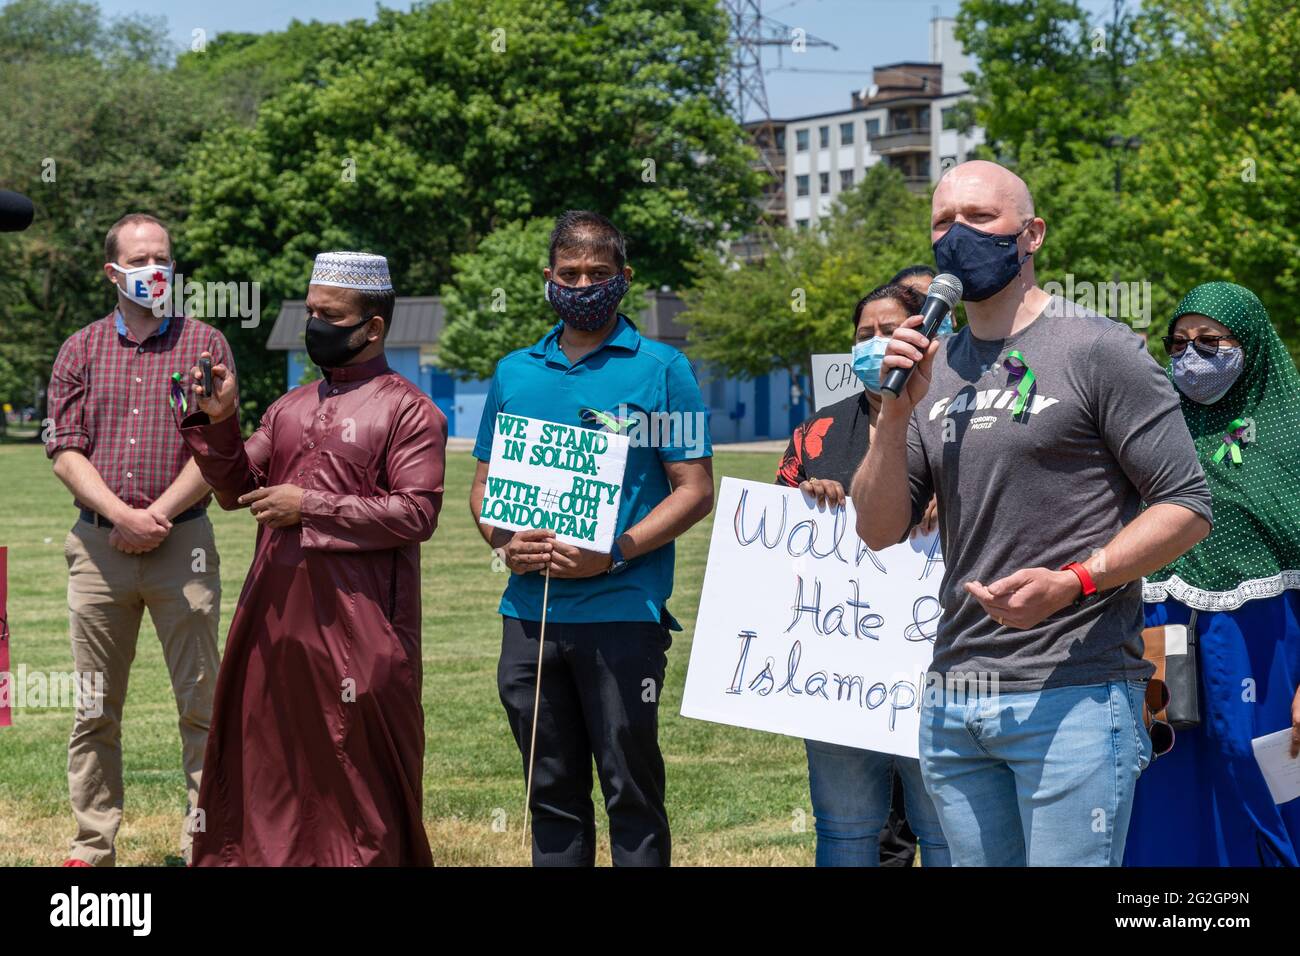 Toronto, Canada-June 11, 2021: A walk against hate & islamophobia was held in the Danforth in solidarity with the family killed in London, Ontario Stock Photo